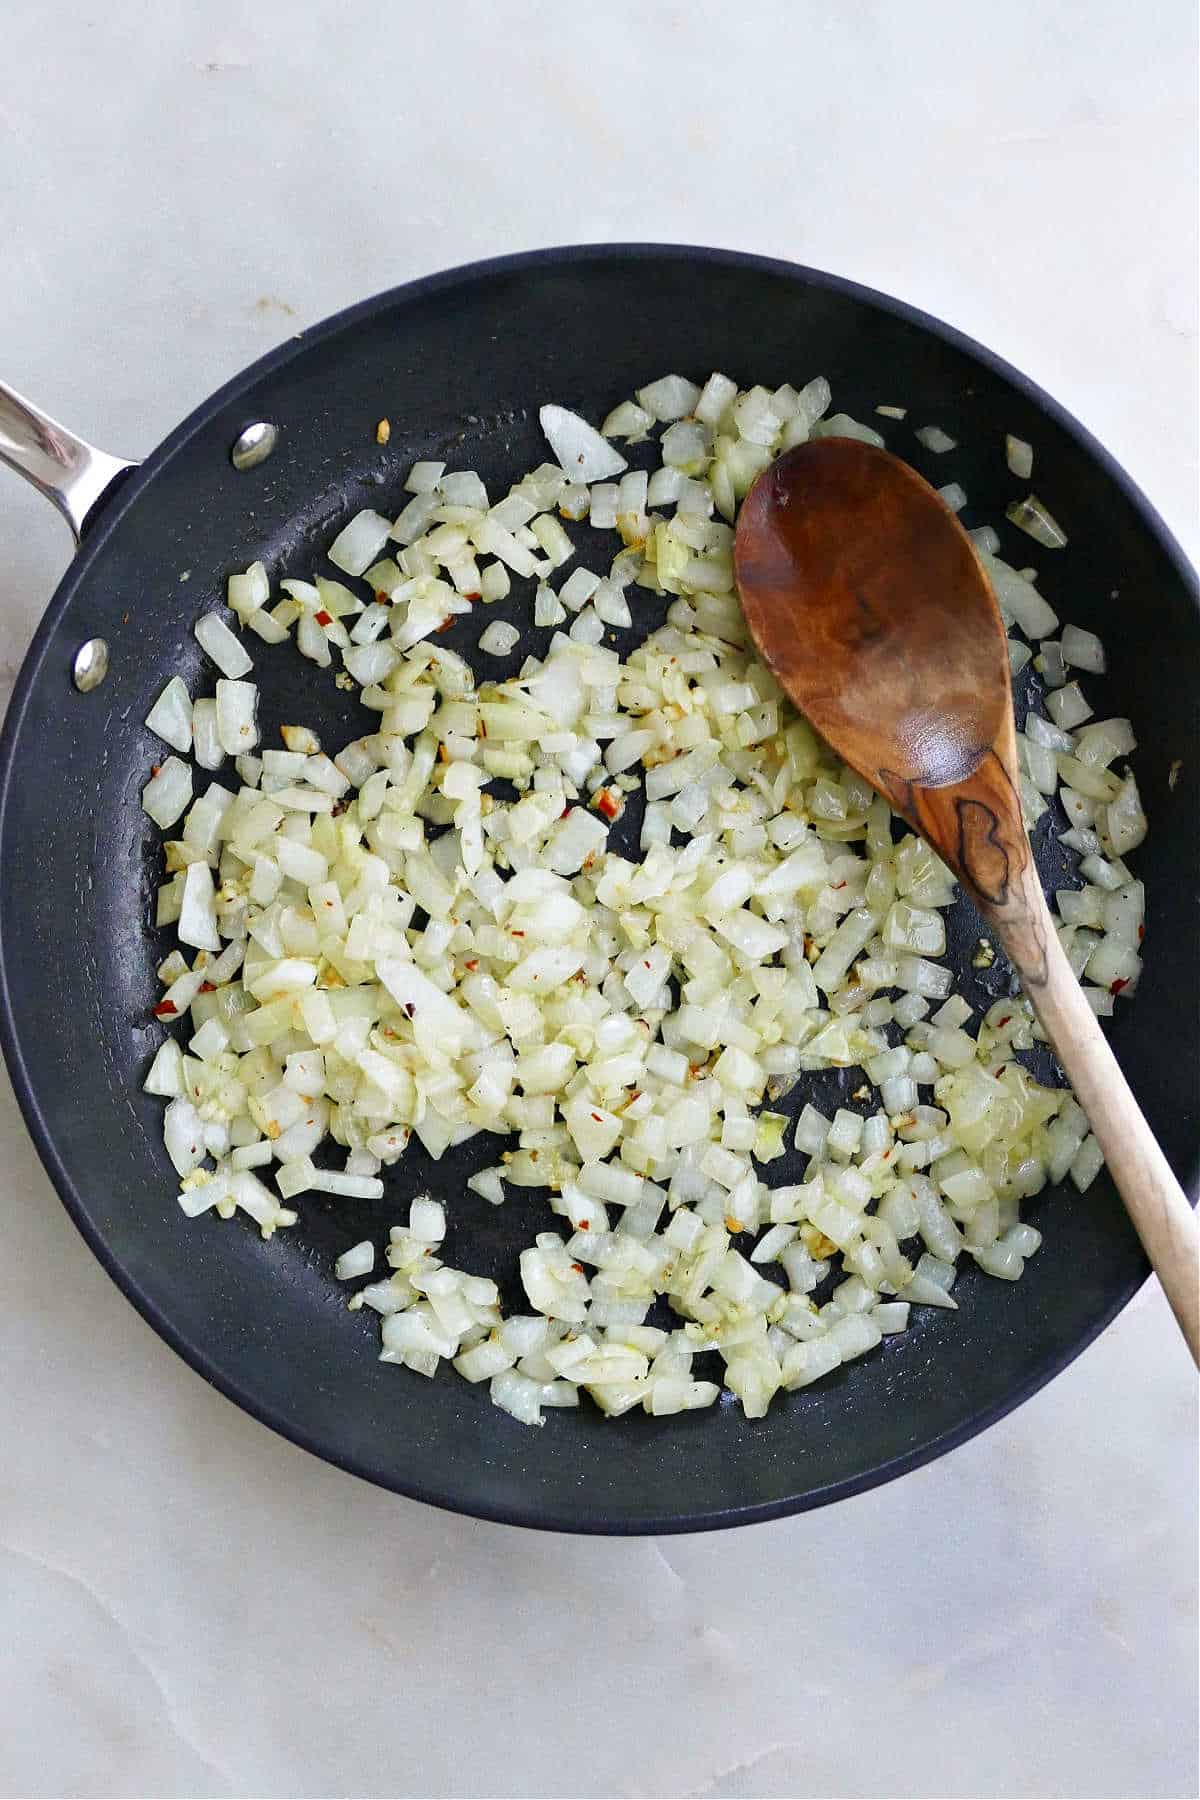 diced onions and garlic cooking in olive oil in a skillet